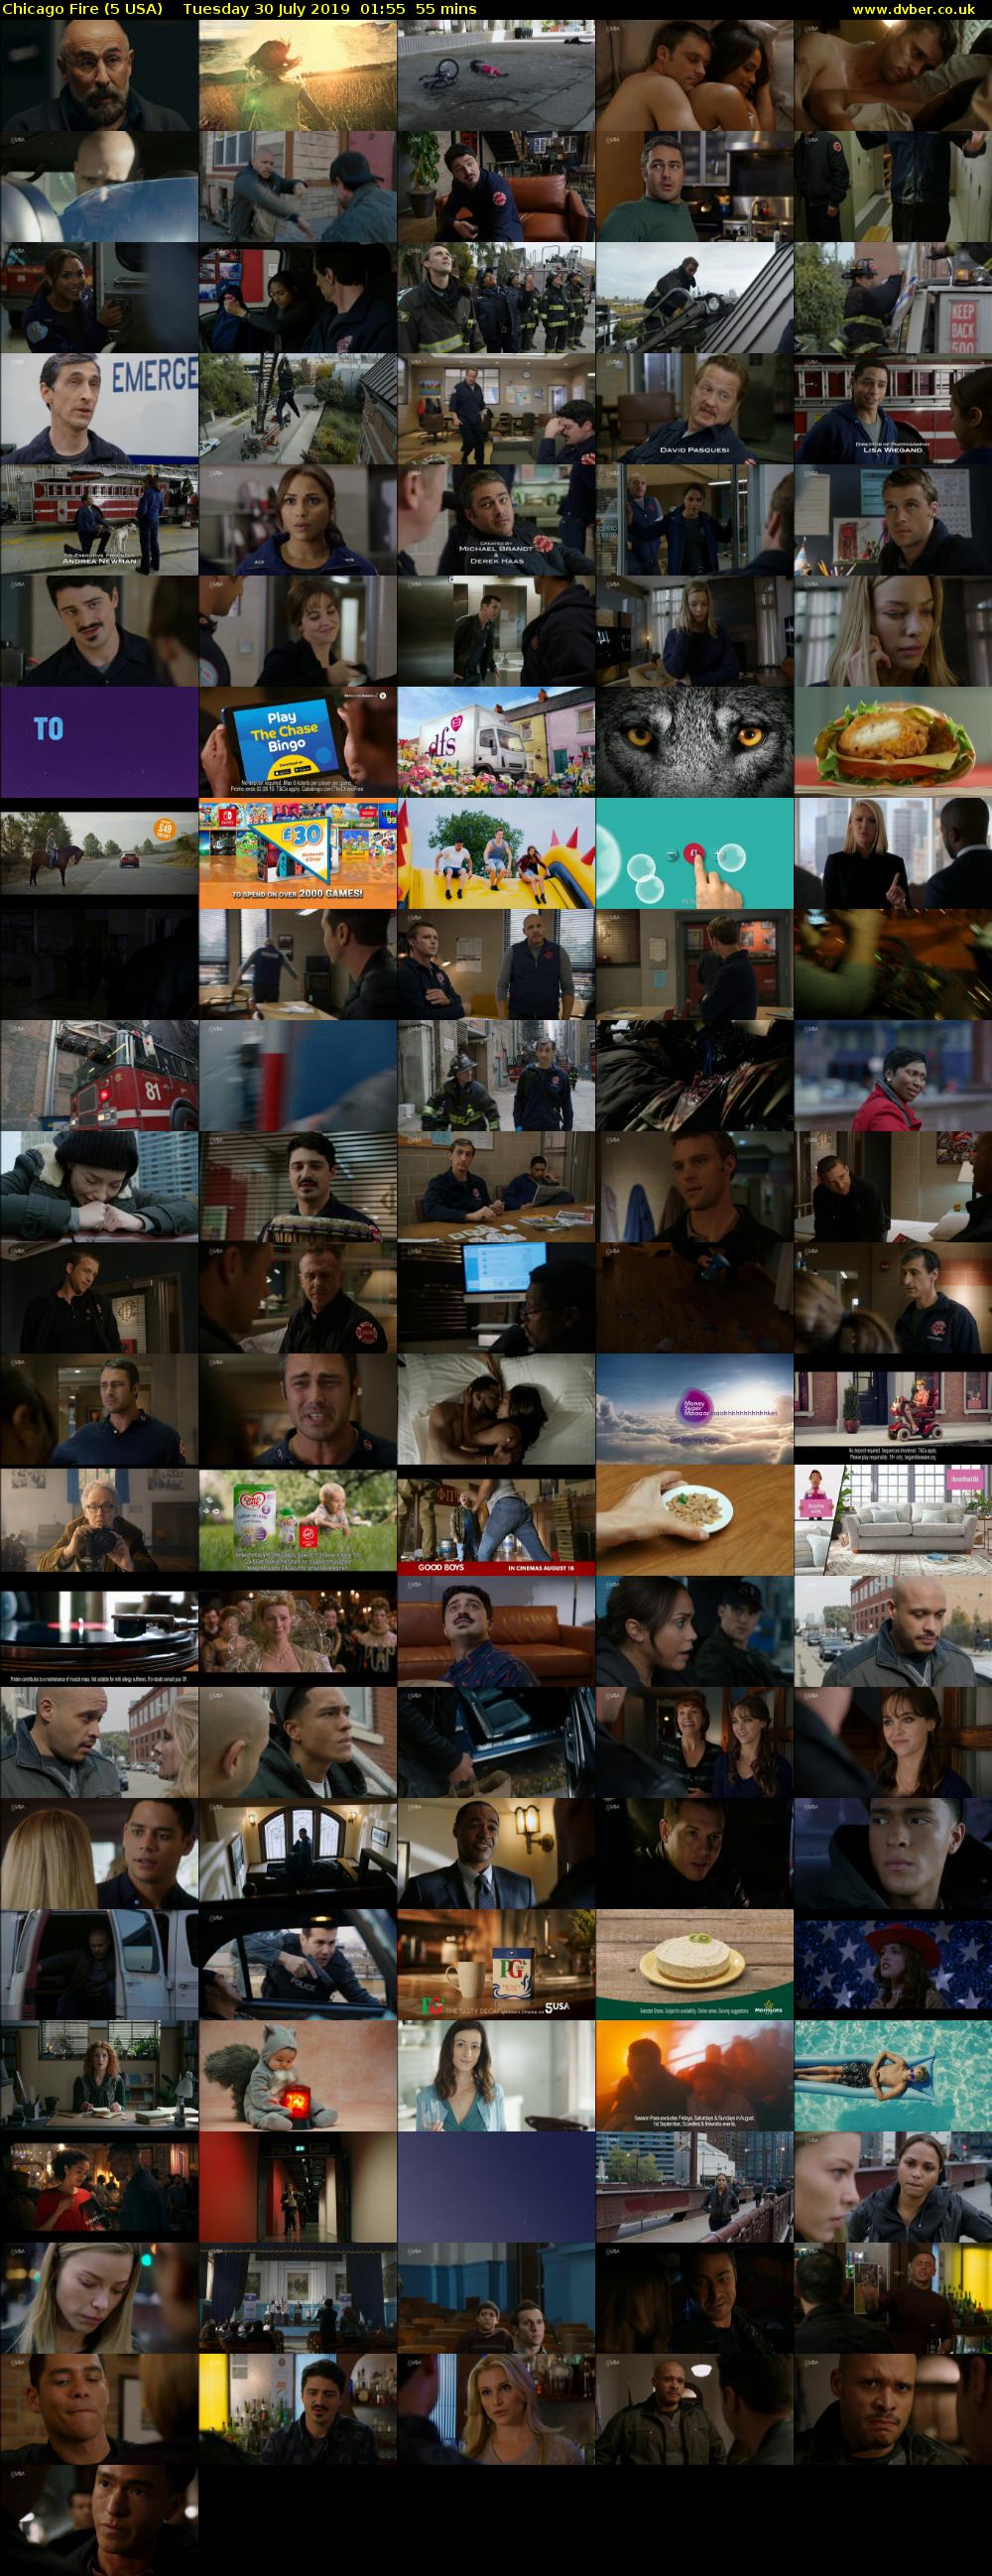 Chicago Fire (5 USA) Tuesday 30 July 2019 01:55 - 02:50